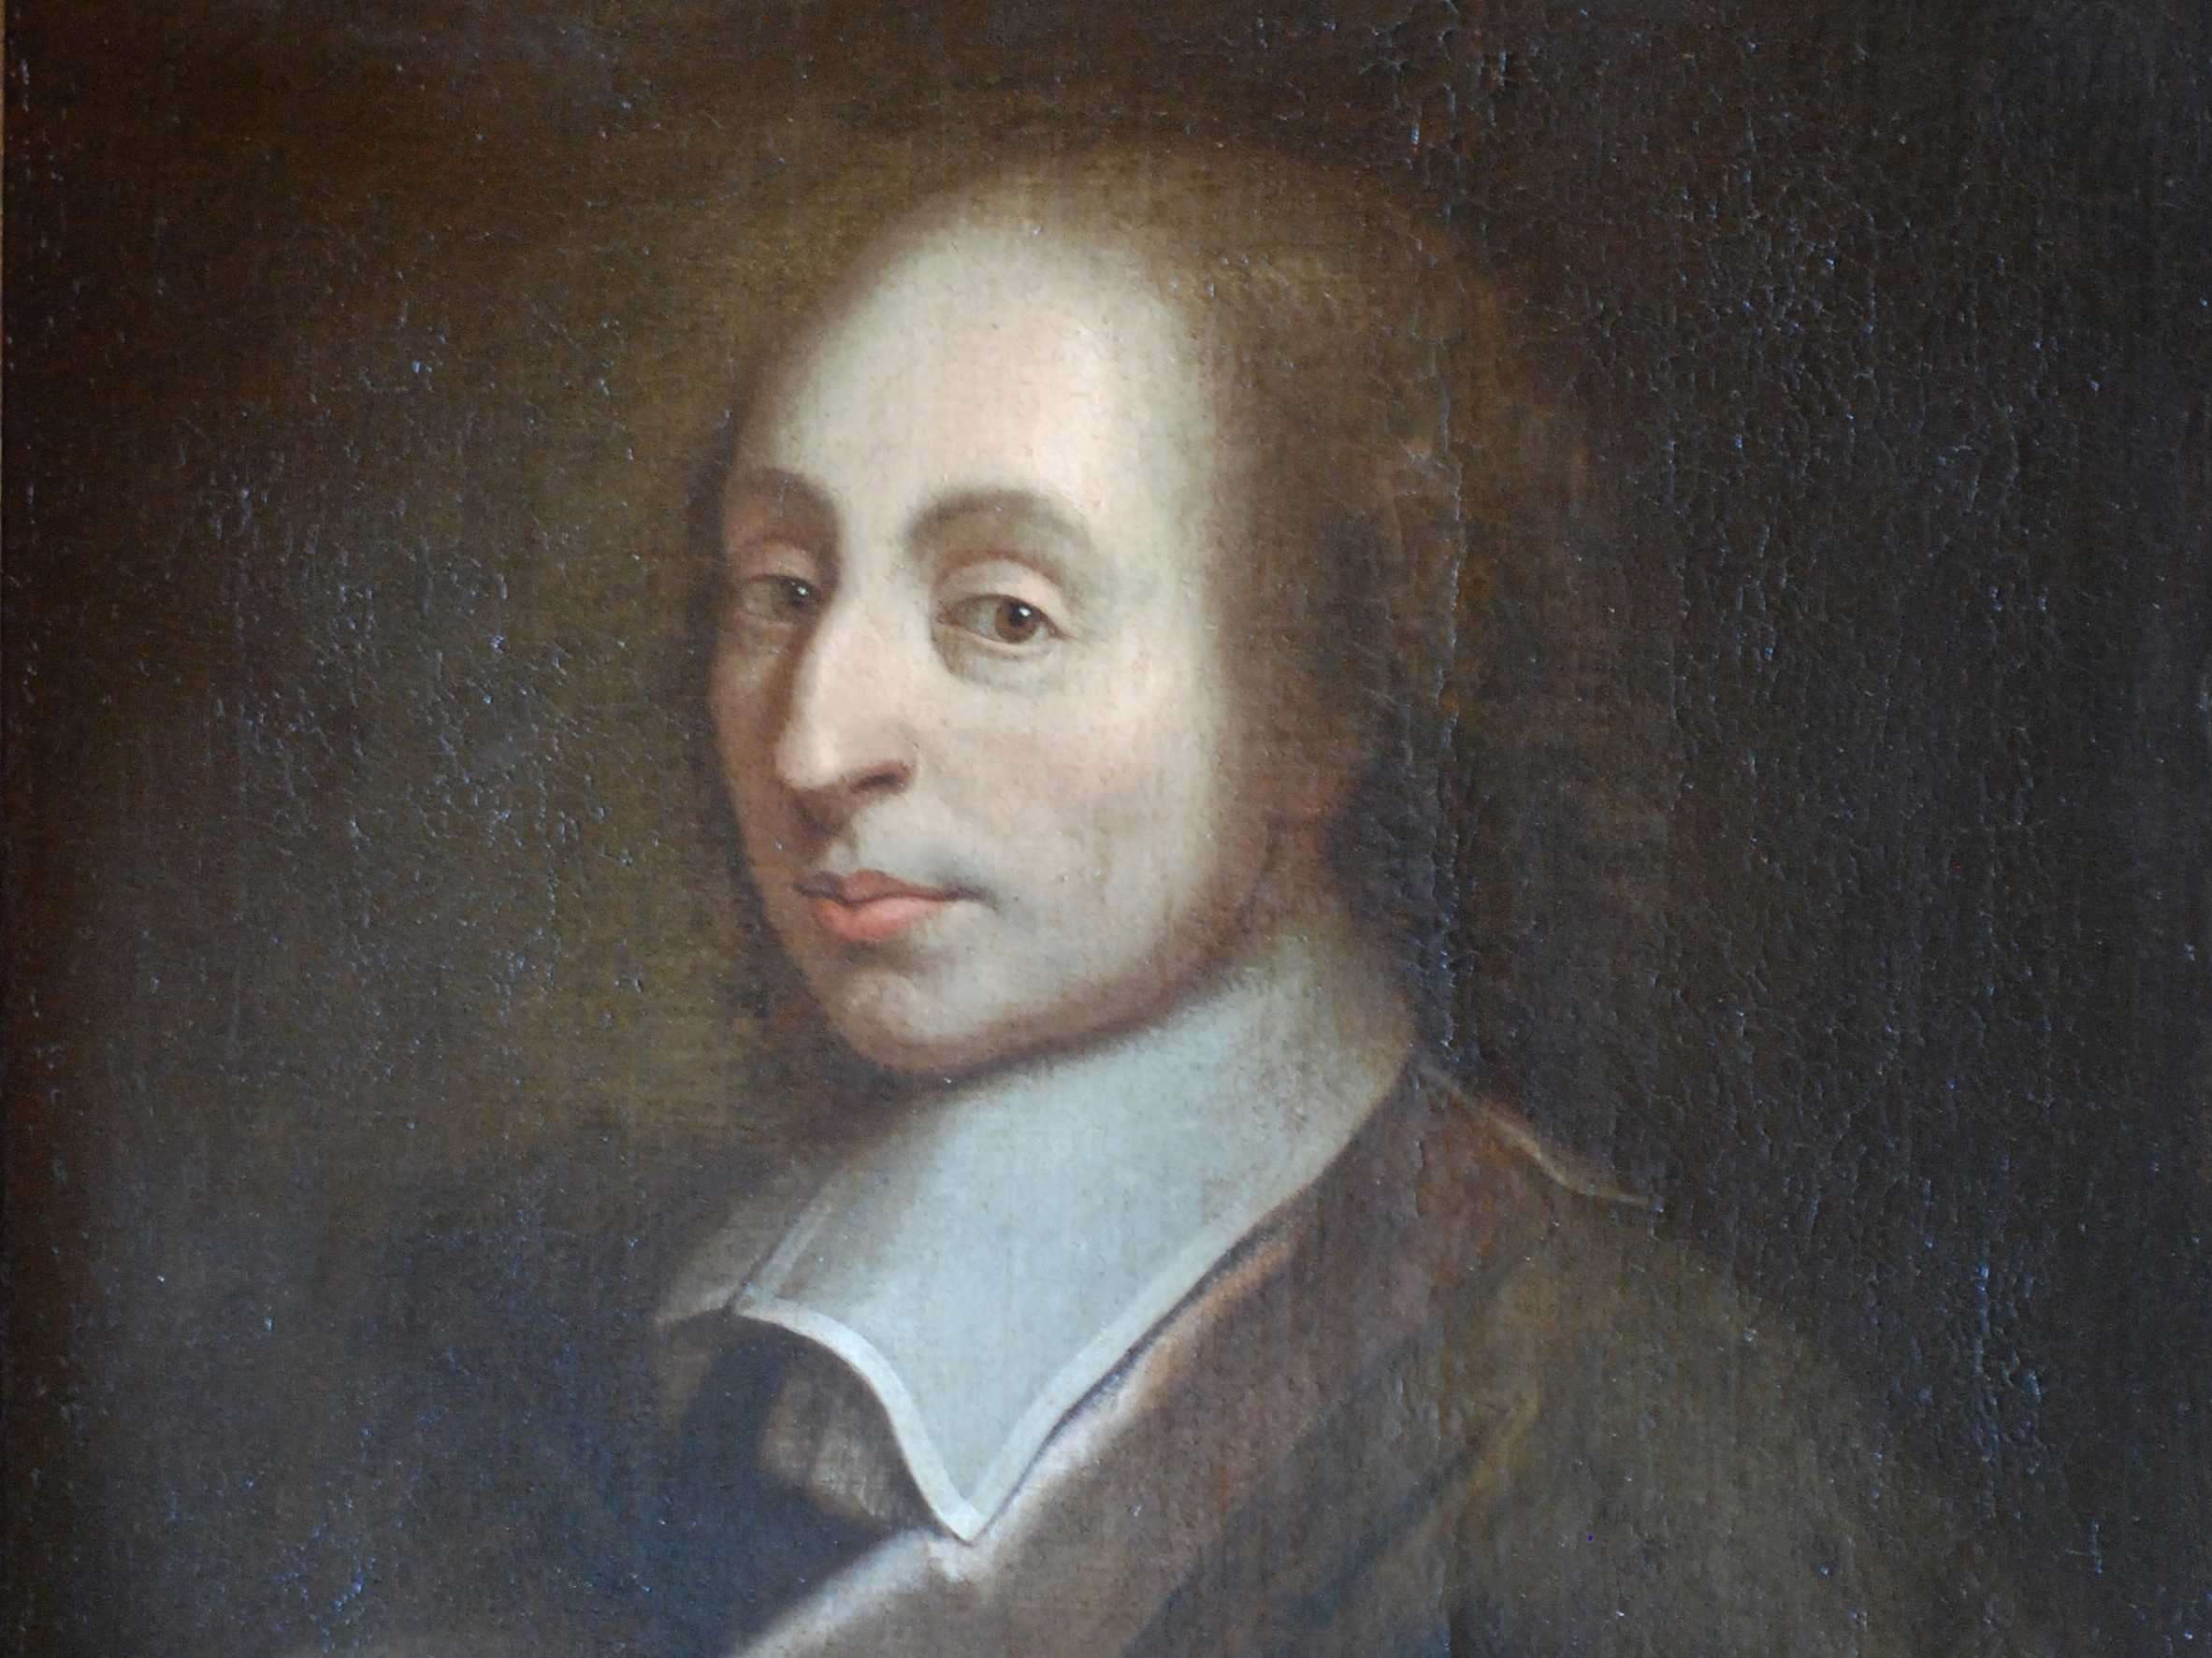 Pascal: Named for famed philosopher Blaise Pascal, this language was